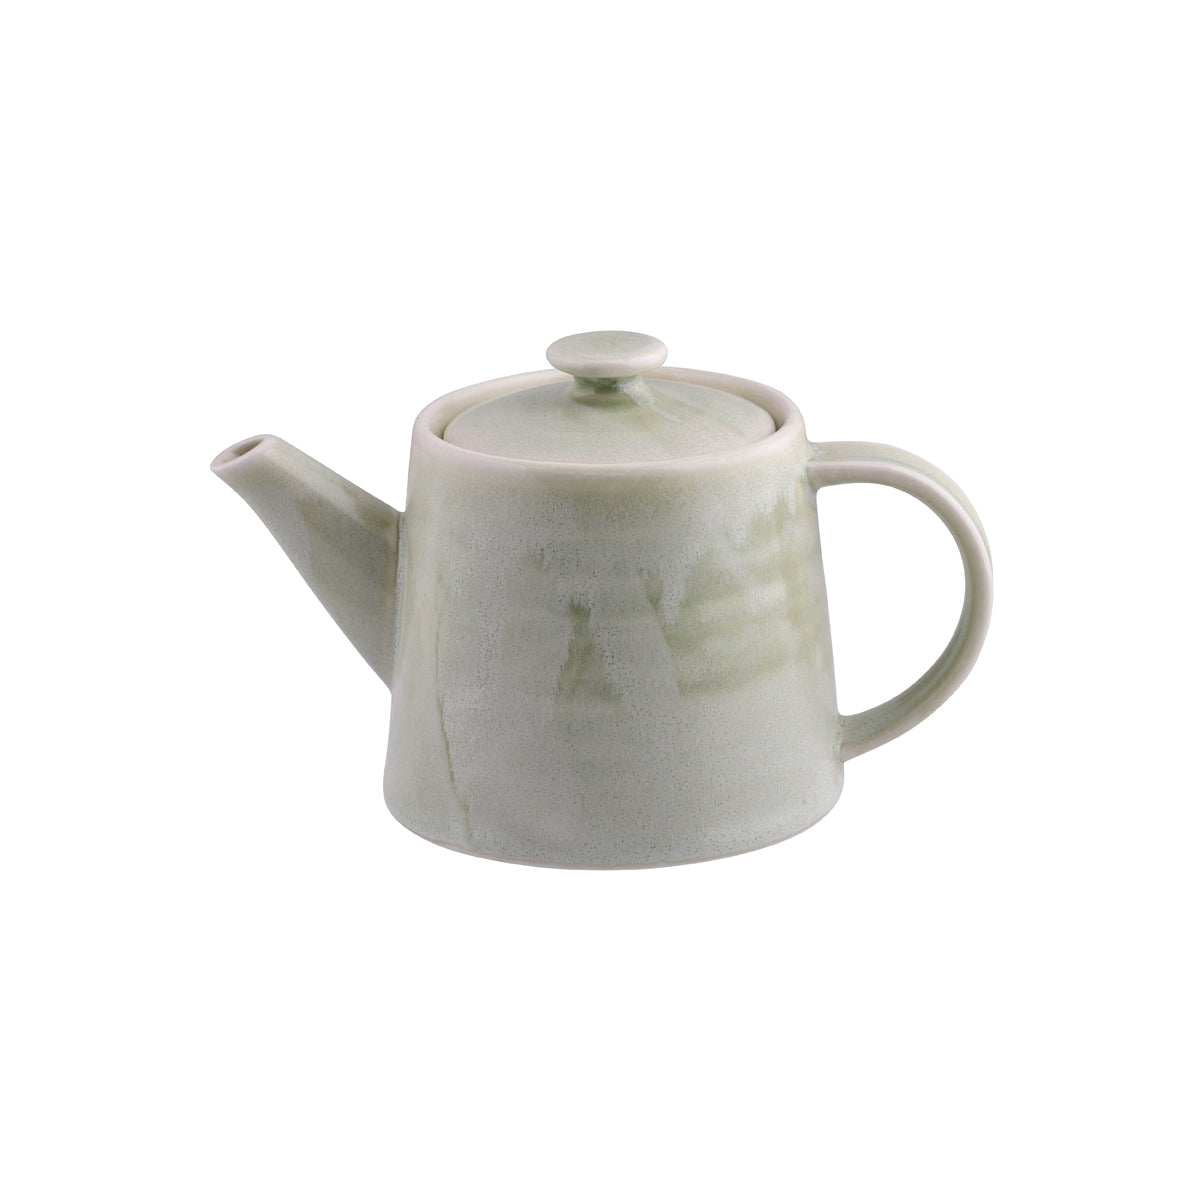 Teapot - 380ml, Lush from Moda Porcelain. made out of Porcelain and sold in boxes of 1. Hospitality quality at wholesale price with The Flying Fork! 